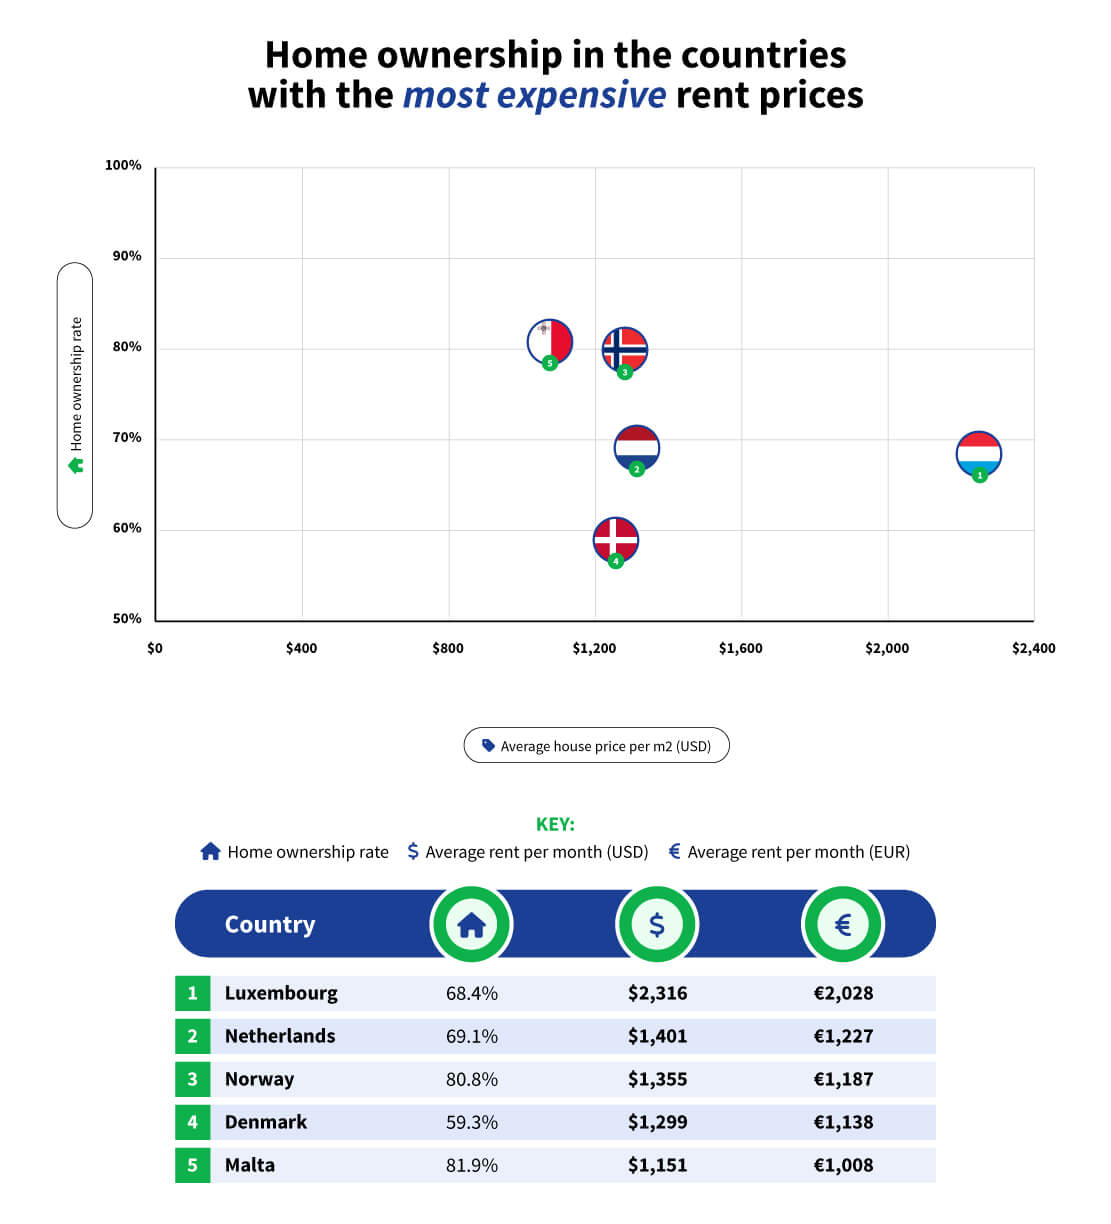 Home ownership in the countries with the most expensive rent prices